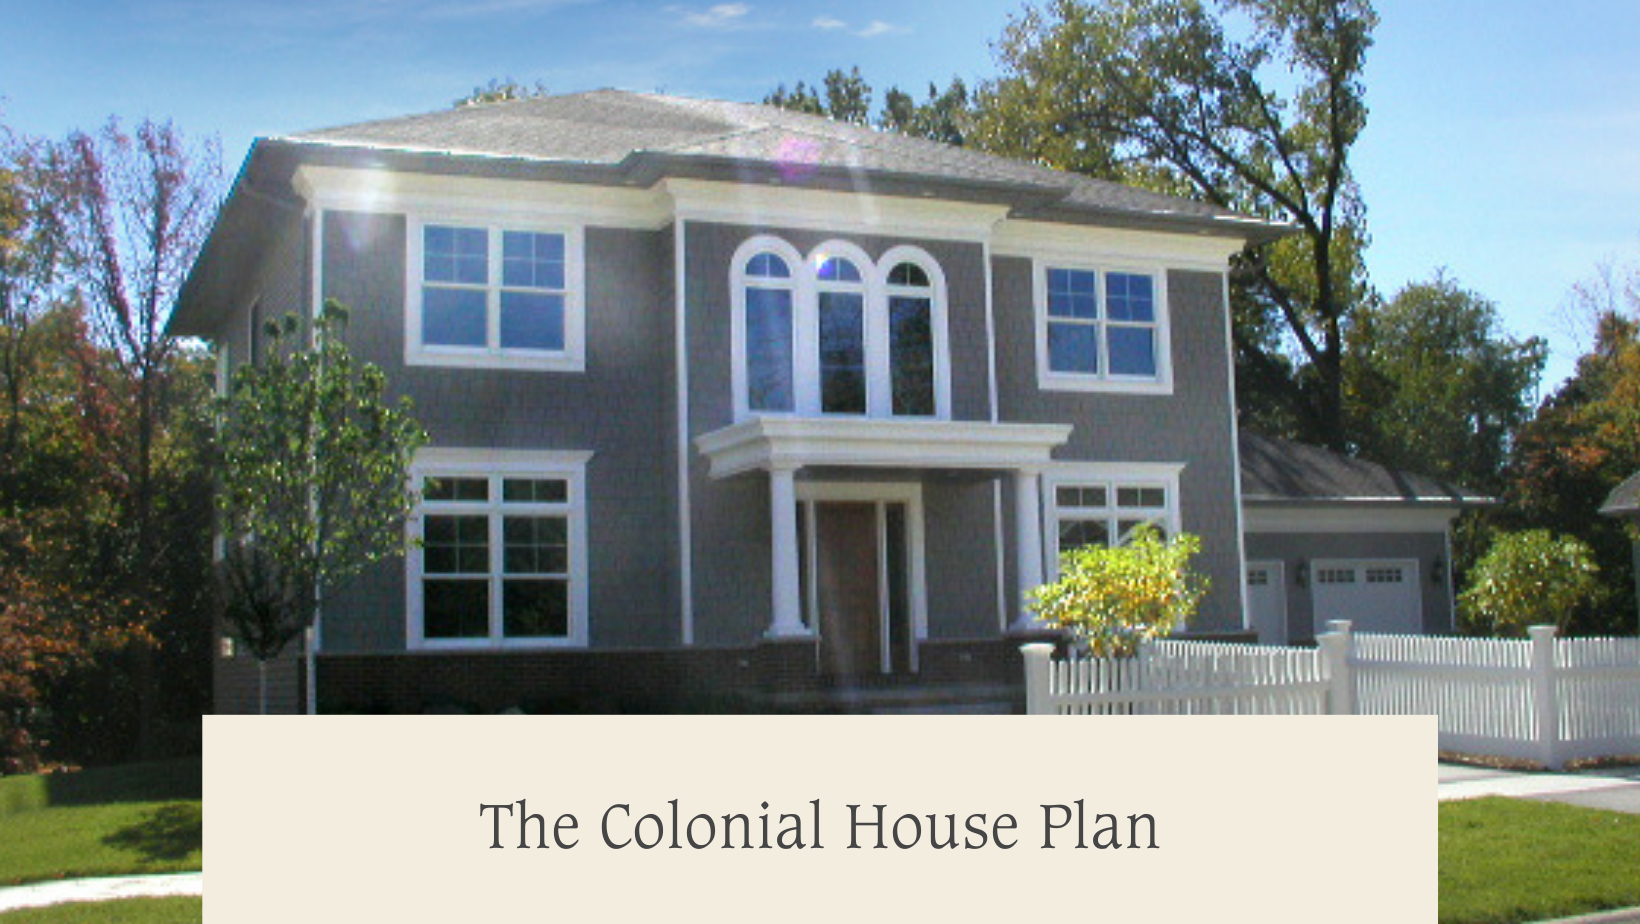 The Colonial House Plan